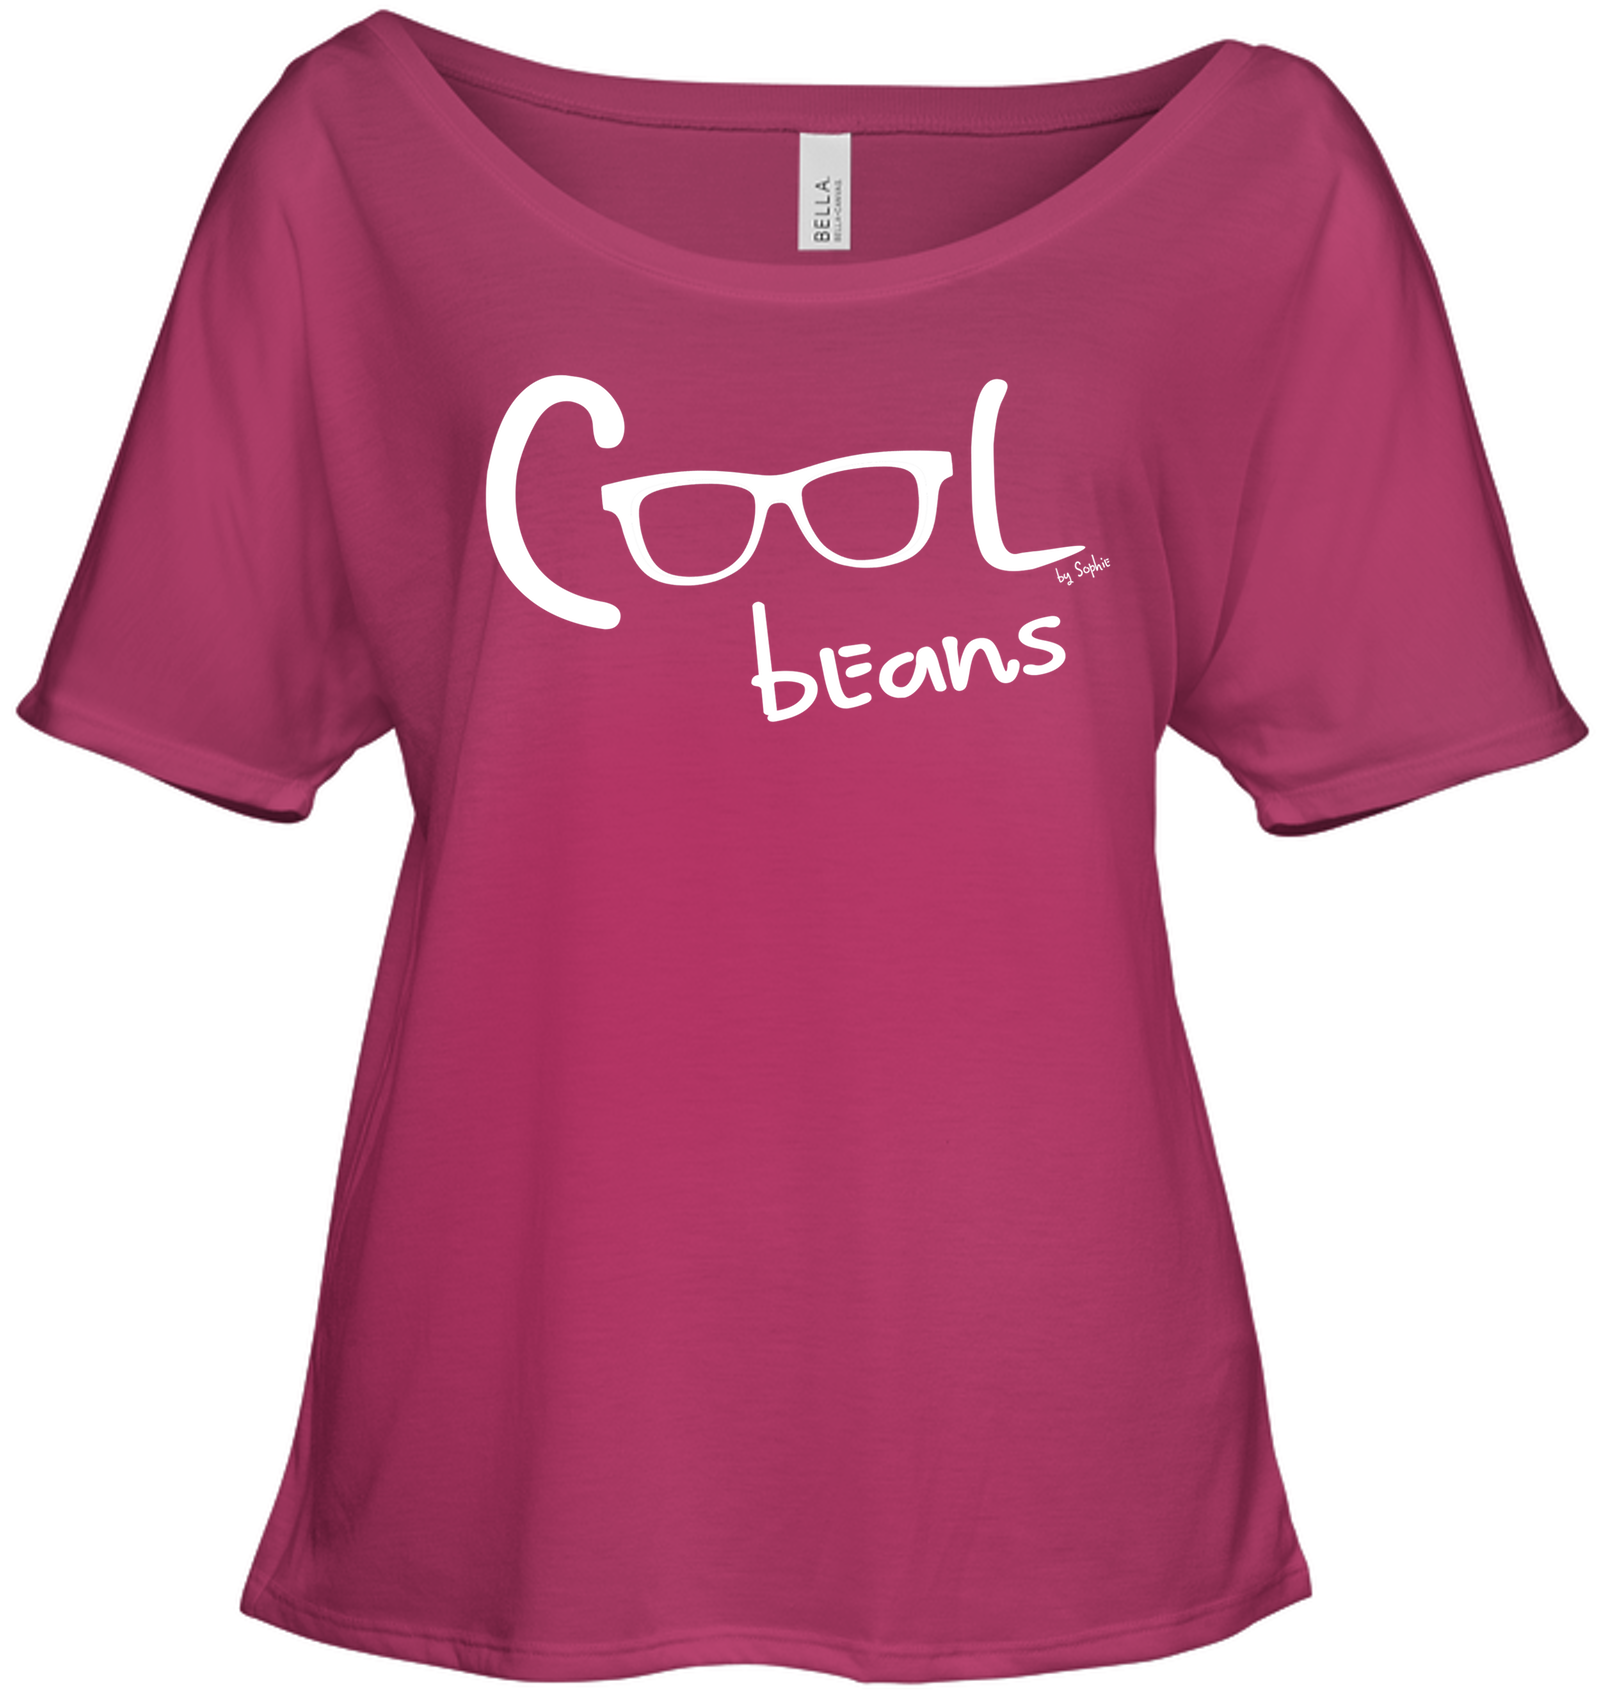 Cool Beans - White - Bella + Canvas Women's Slouchy Tee